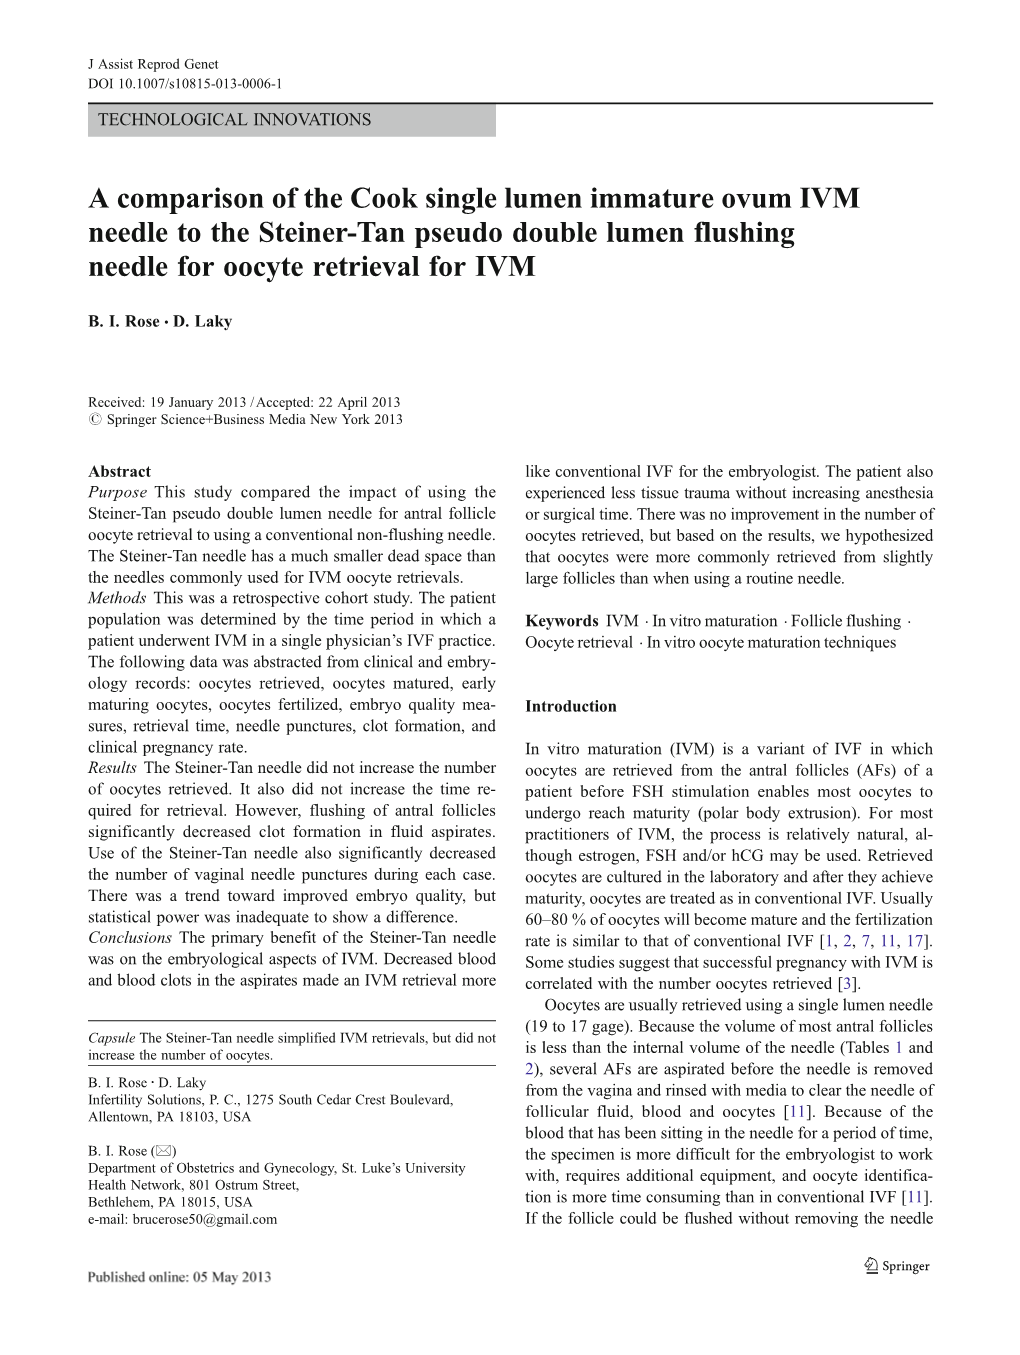 A Comparison of the Cook Single Lumen Immature Ovum IVM Needle to the Steiner-Tan Pseudo Double Lumen Flushing Needle for Oocyte Retrieval for IVM